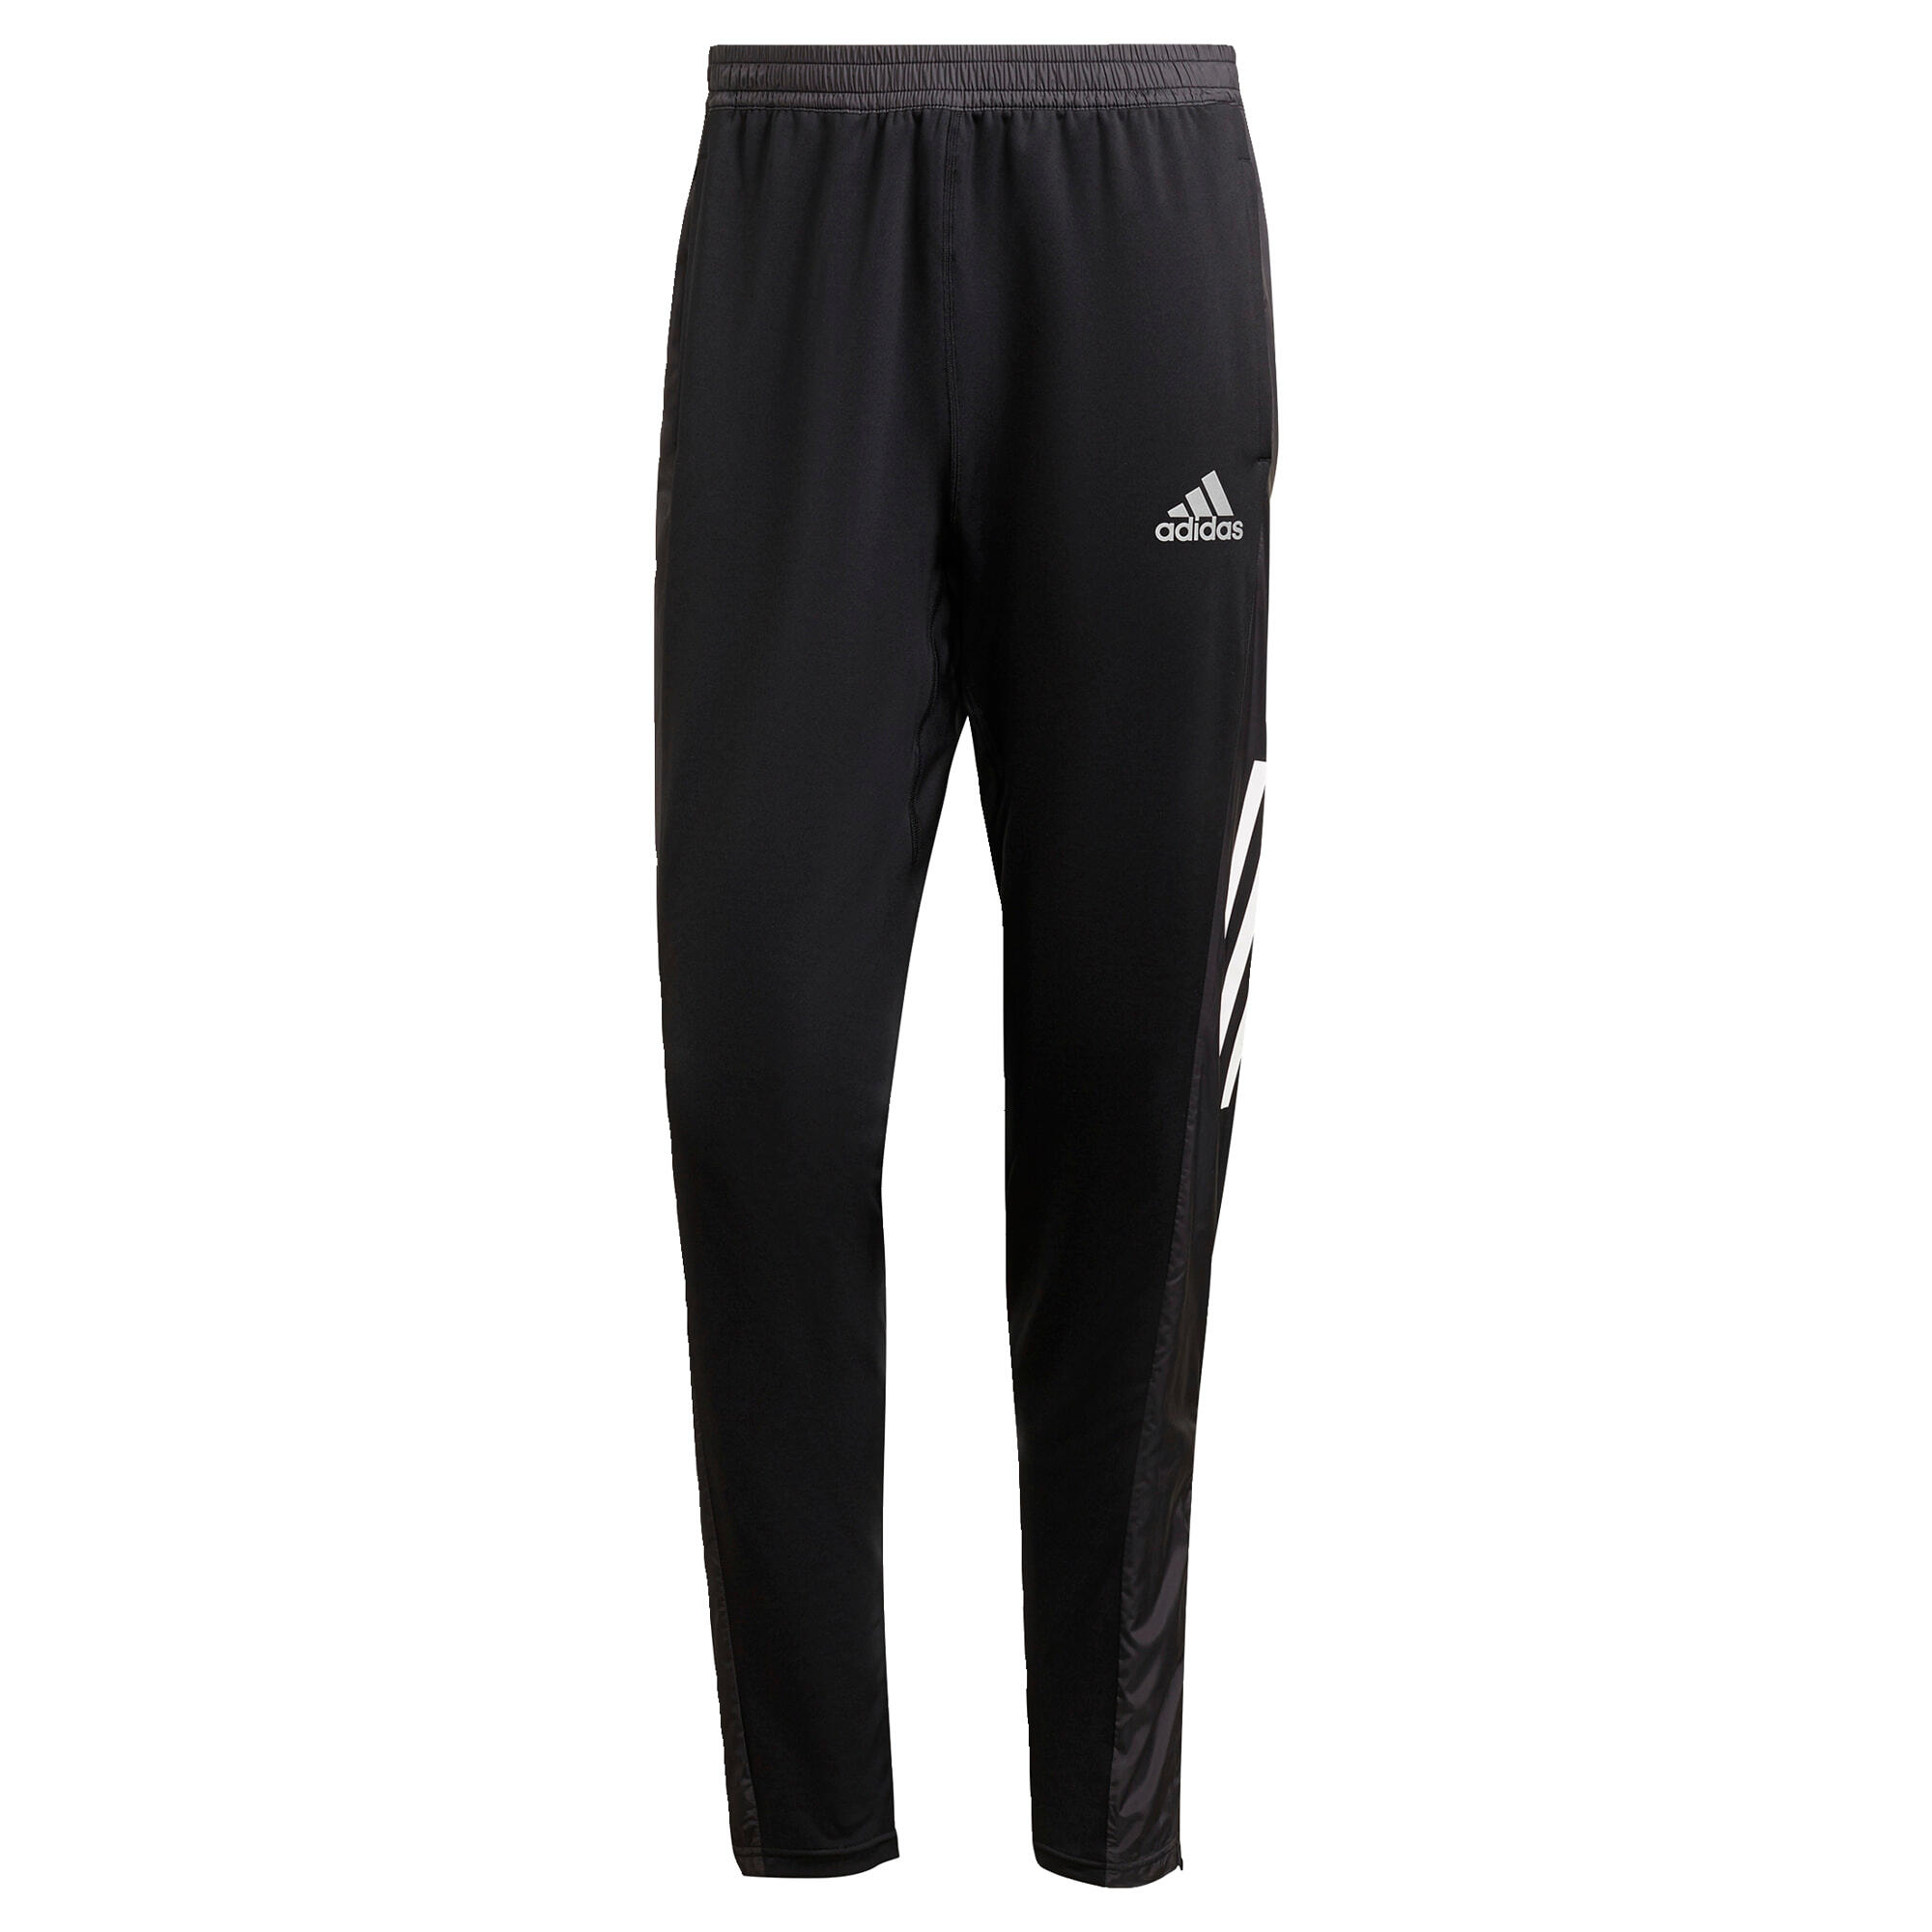 Adidas Own The Run Astro Pants - My Store